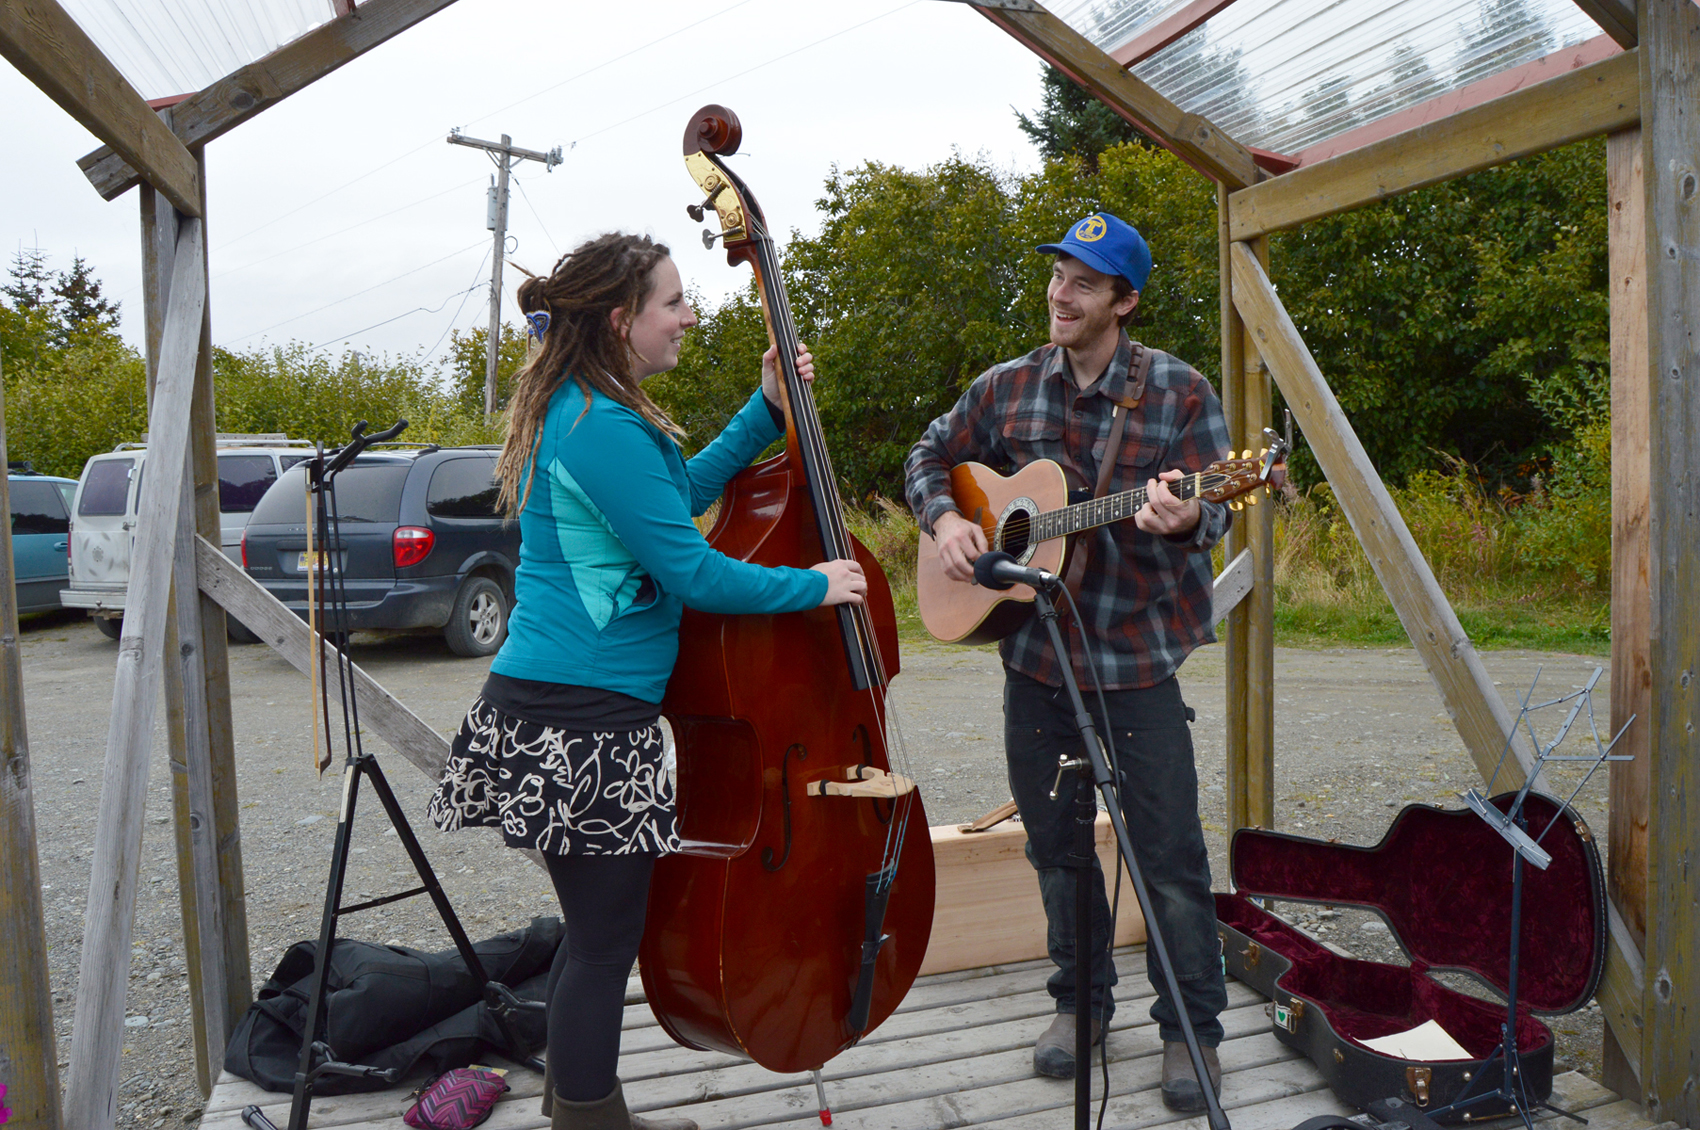 Above, Kari Odden and Kevin Duff perform for the crowd at the last official Homer Farmers Market of the season. -Photos by Annie Rosenthal